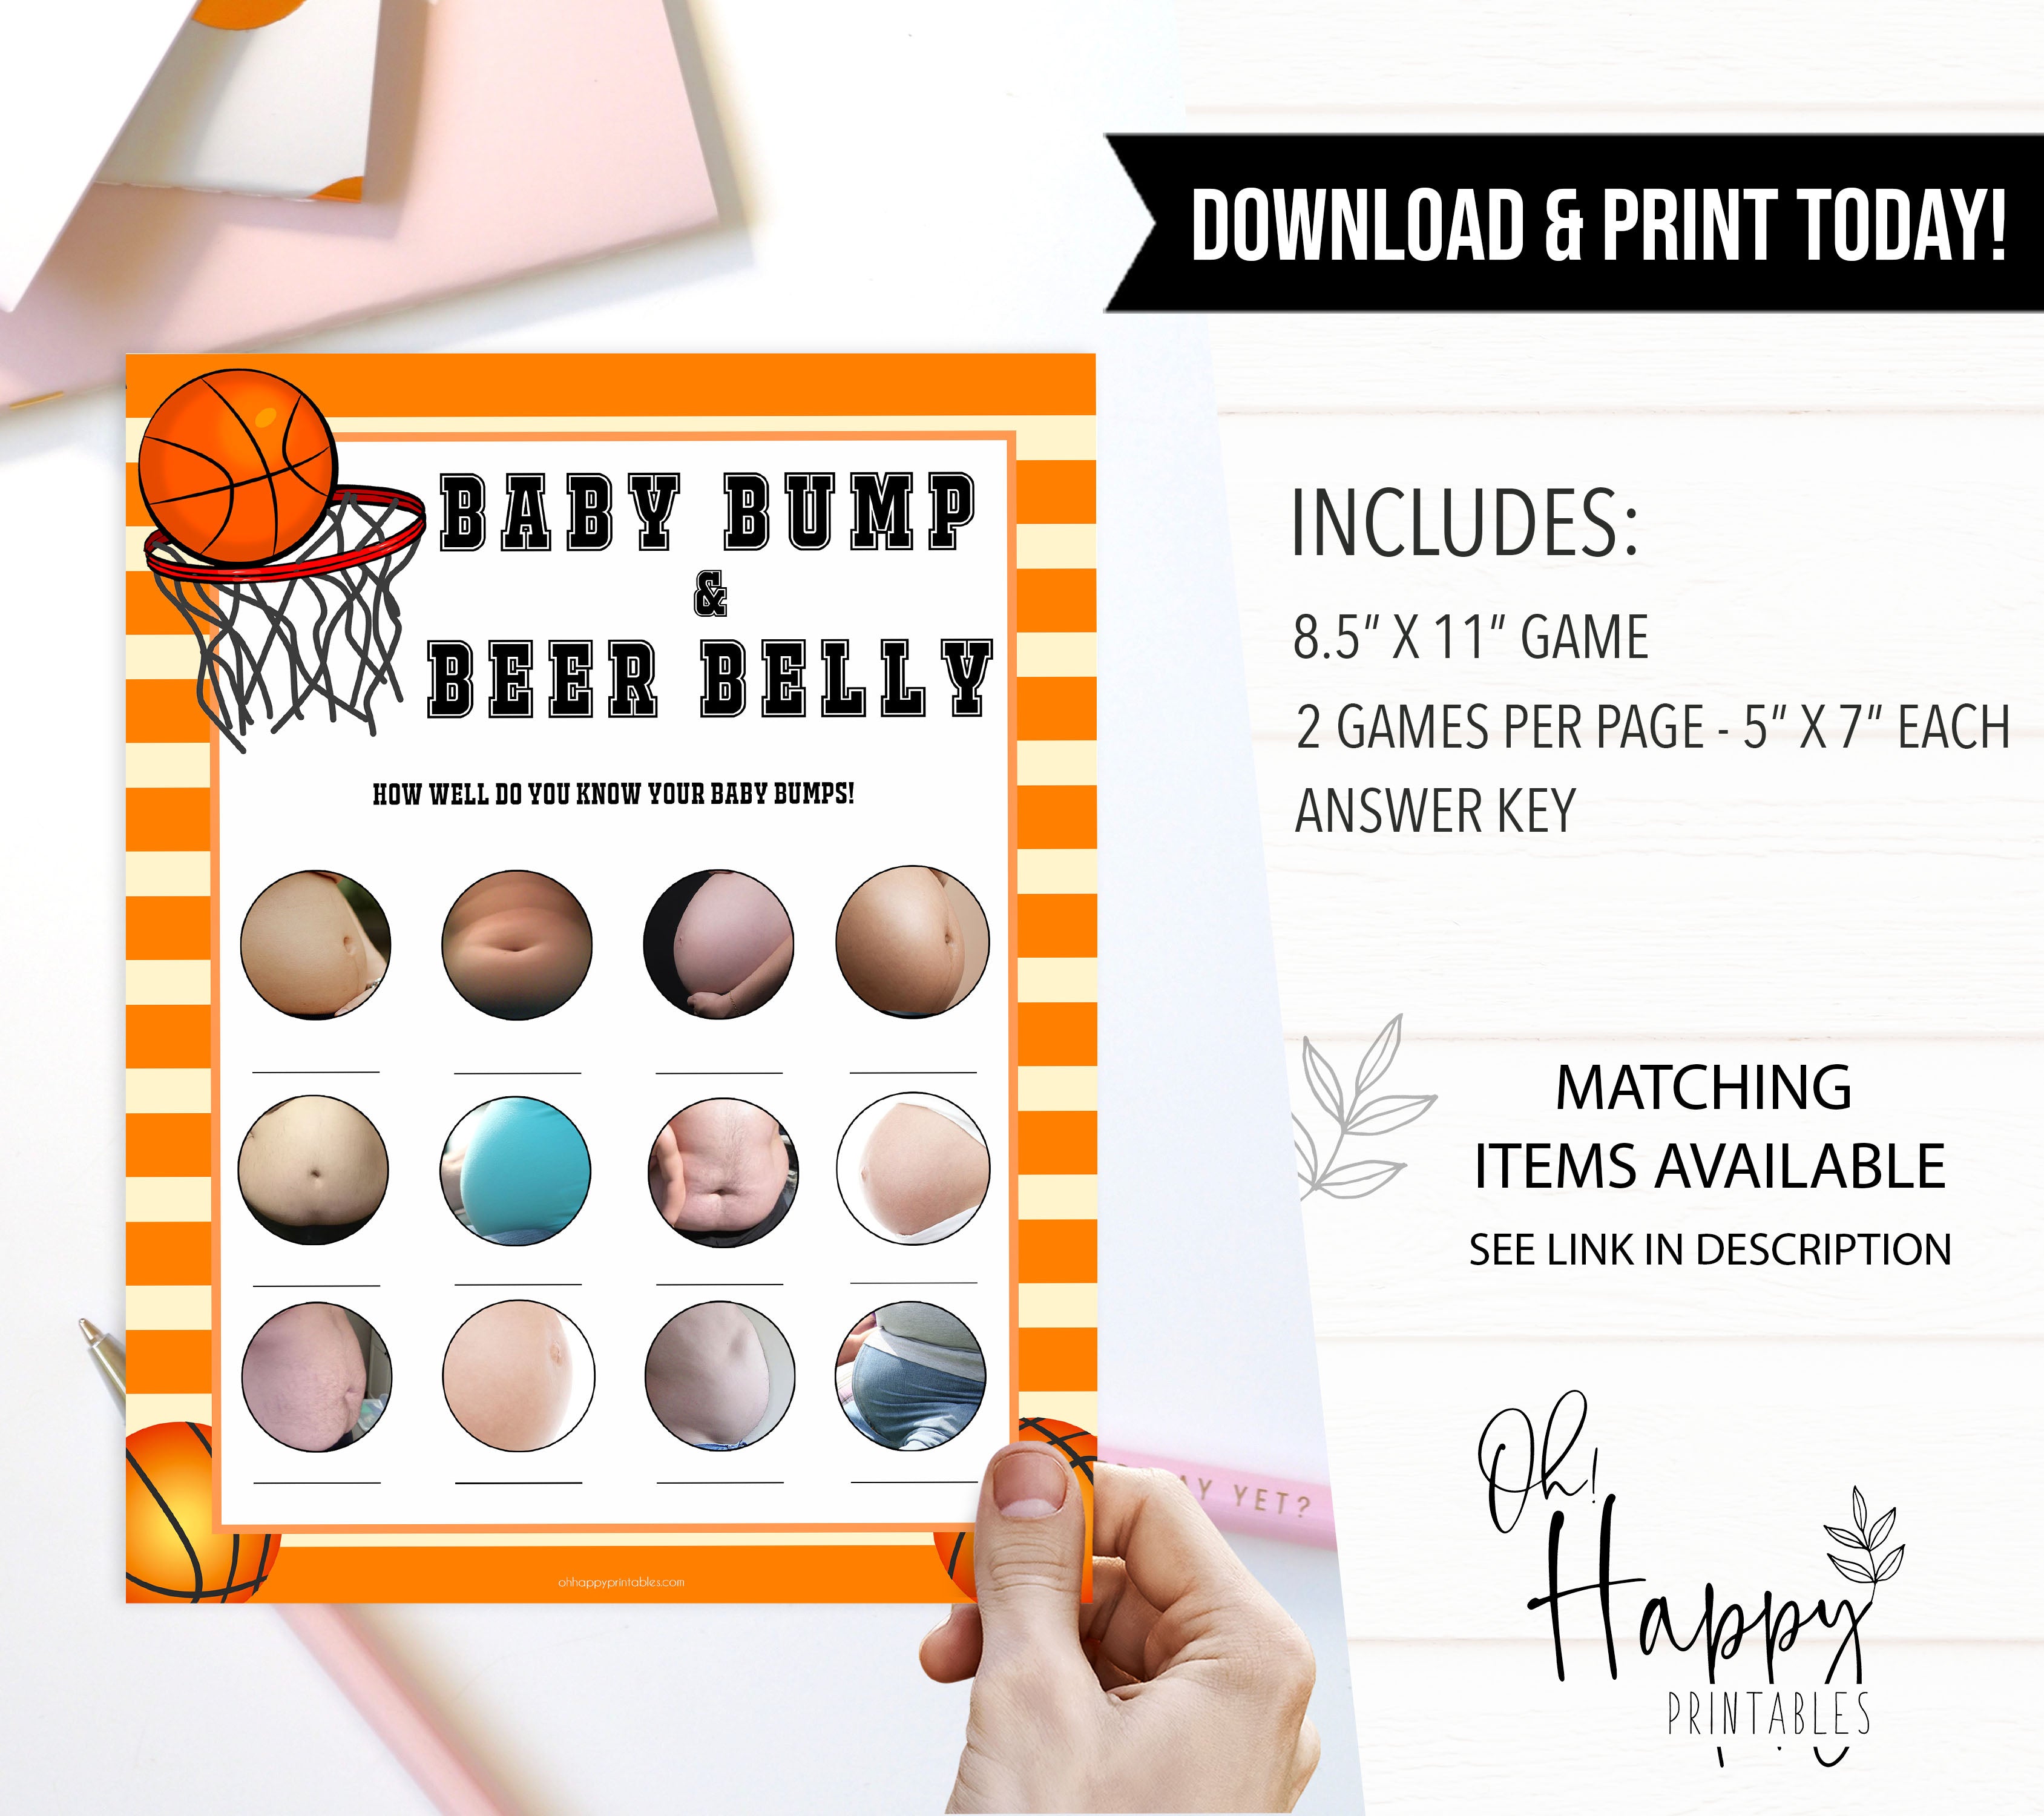 Basketball baby shower games, baby bump or beer belly baby game, printable baby games, basket baby games, baby shower games, basketball baby shower idea, fun baby games, popular baby games